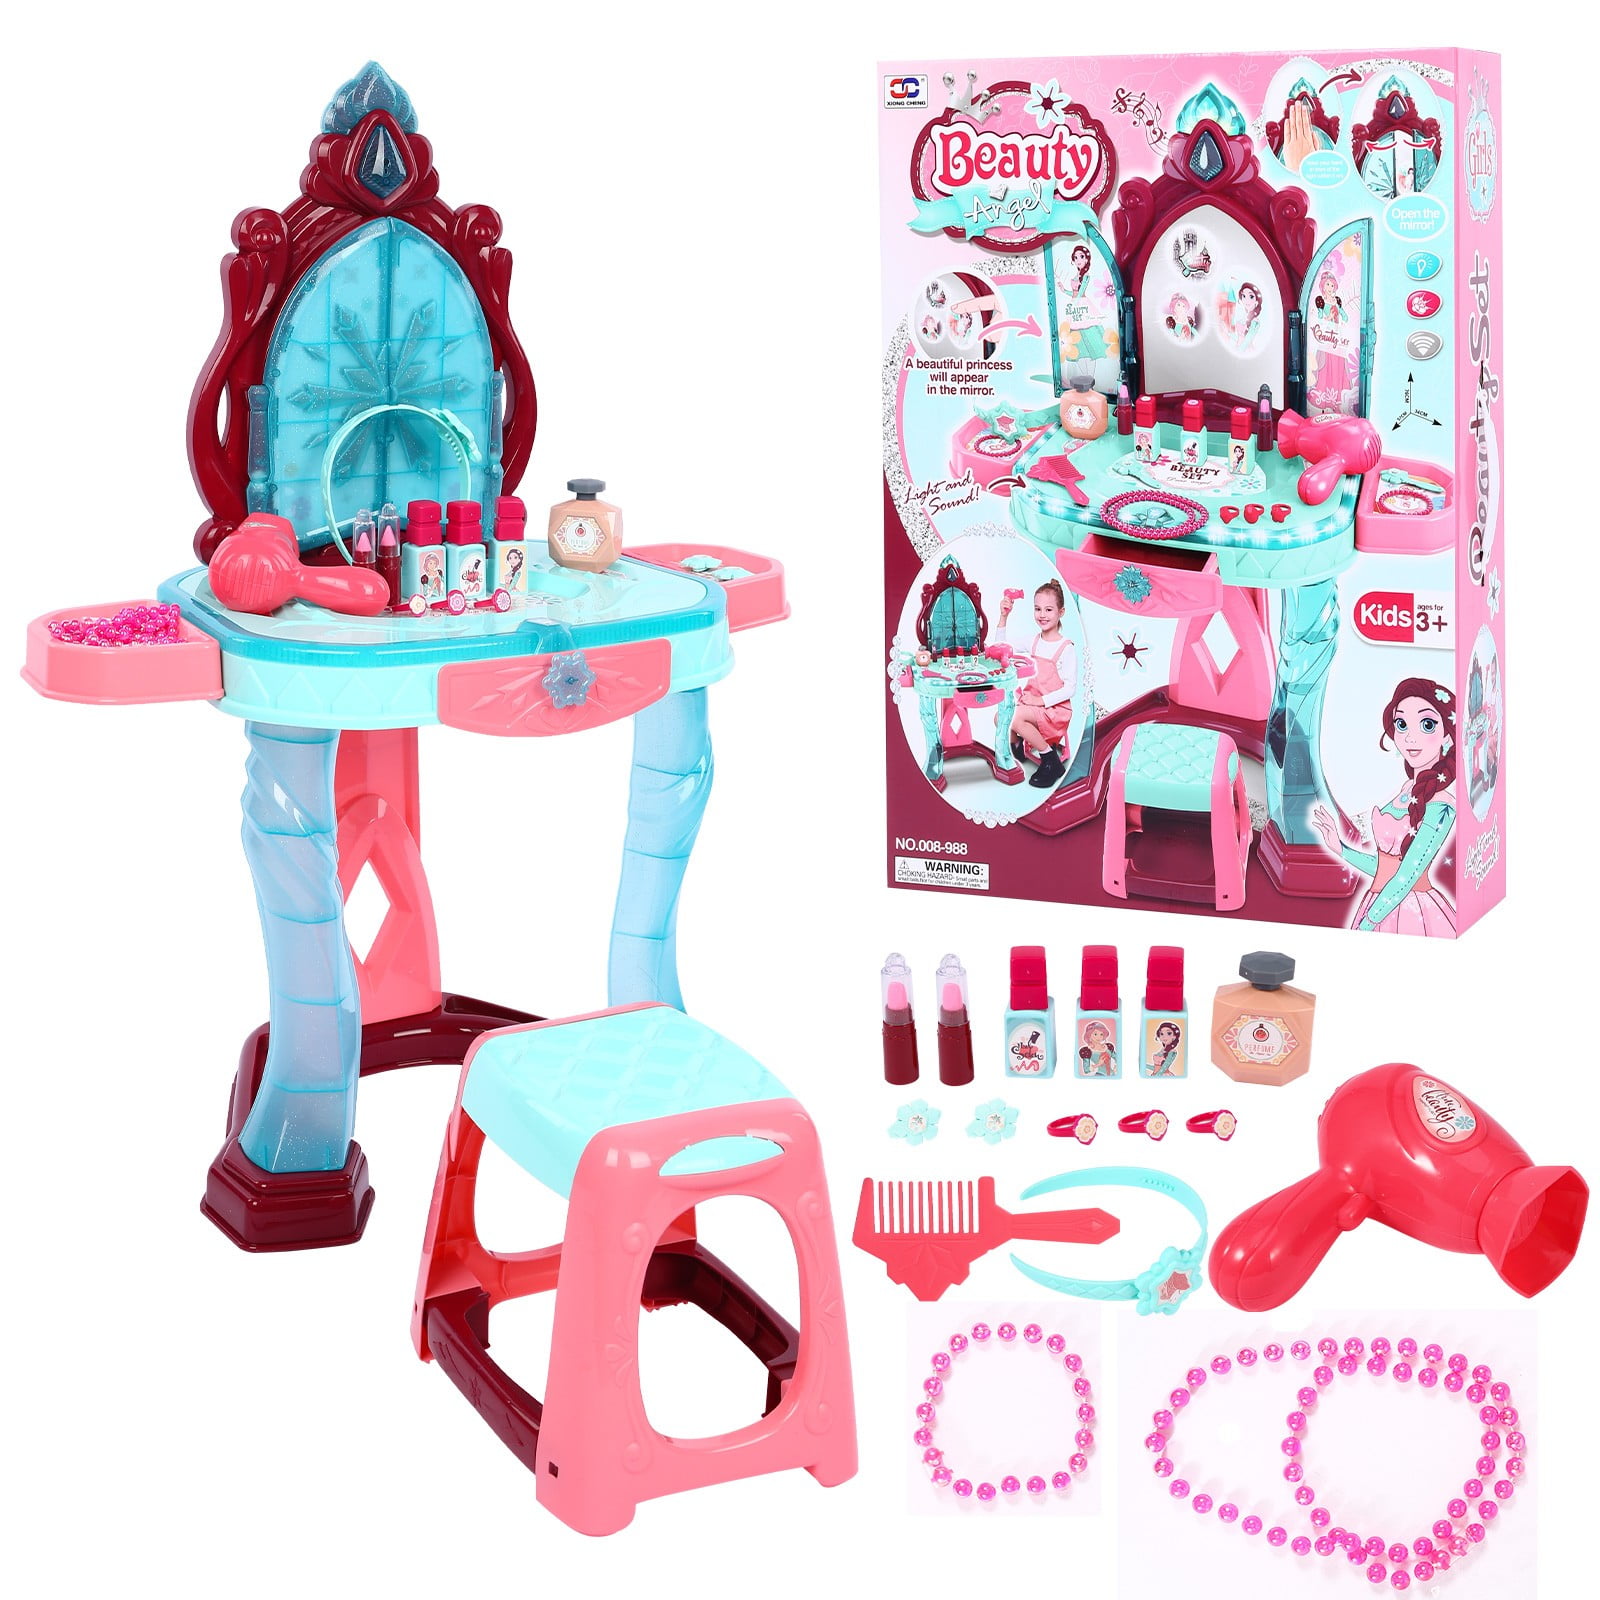 Fantasy Vanity Beauty Dresser Table w/Fashion & Makeup Accessories For Girls USA 